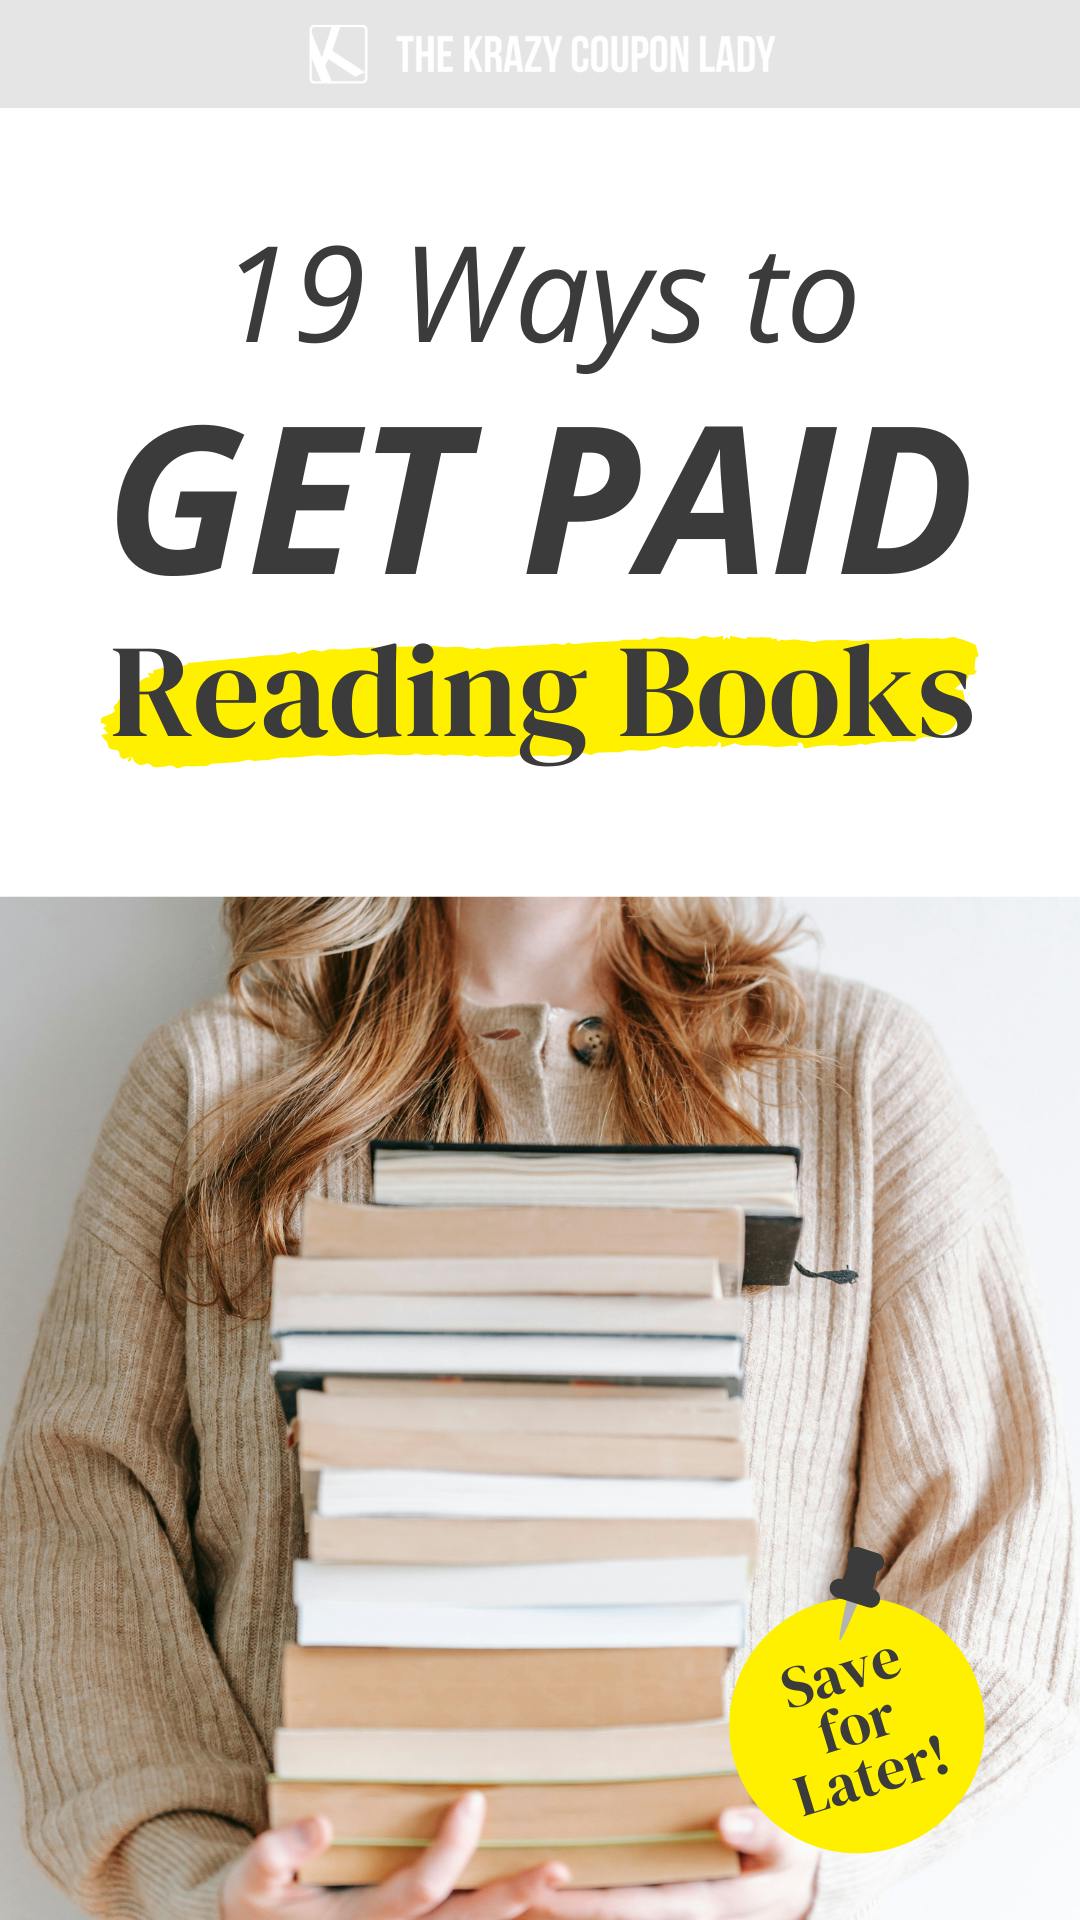 19 Ways to Get Paid Reading Books